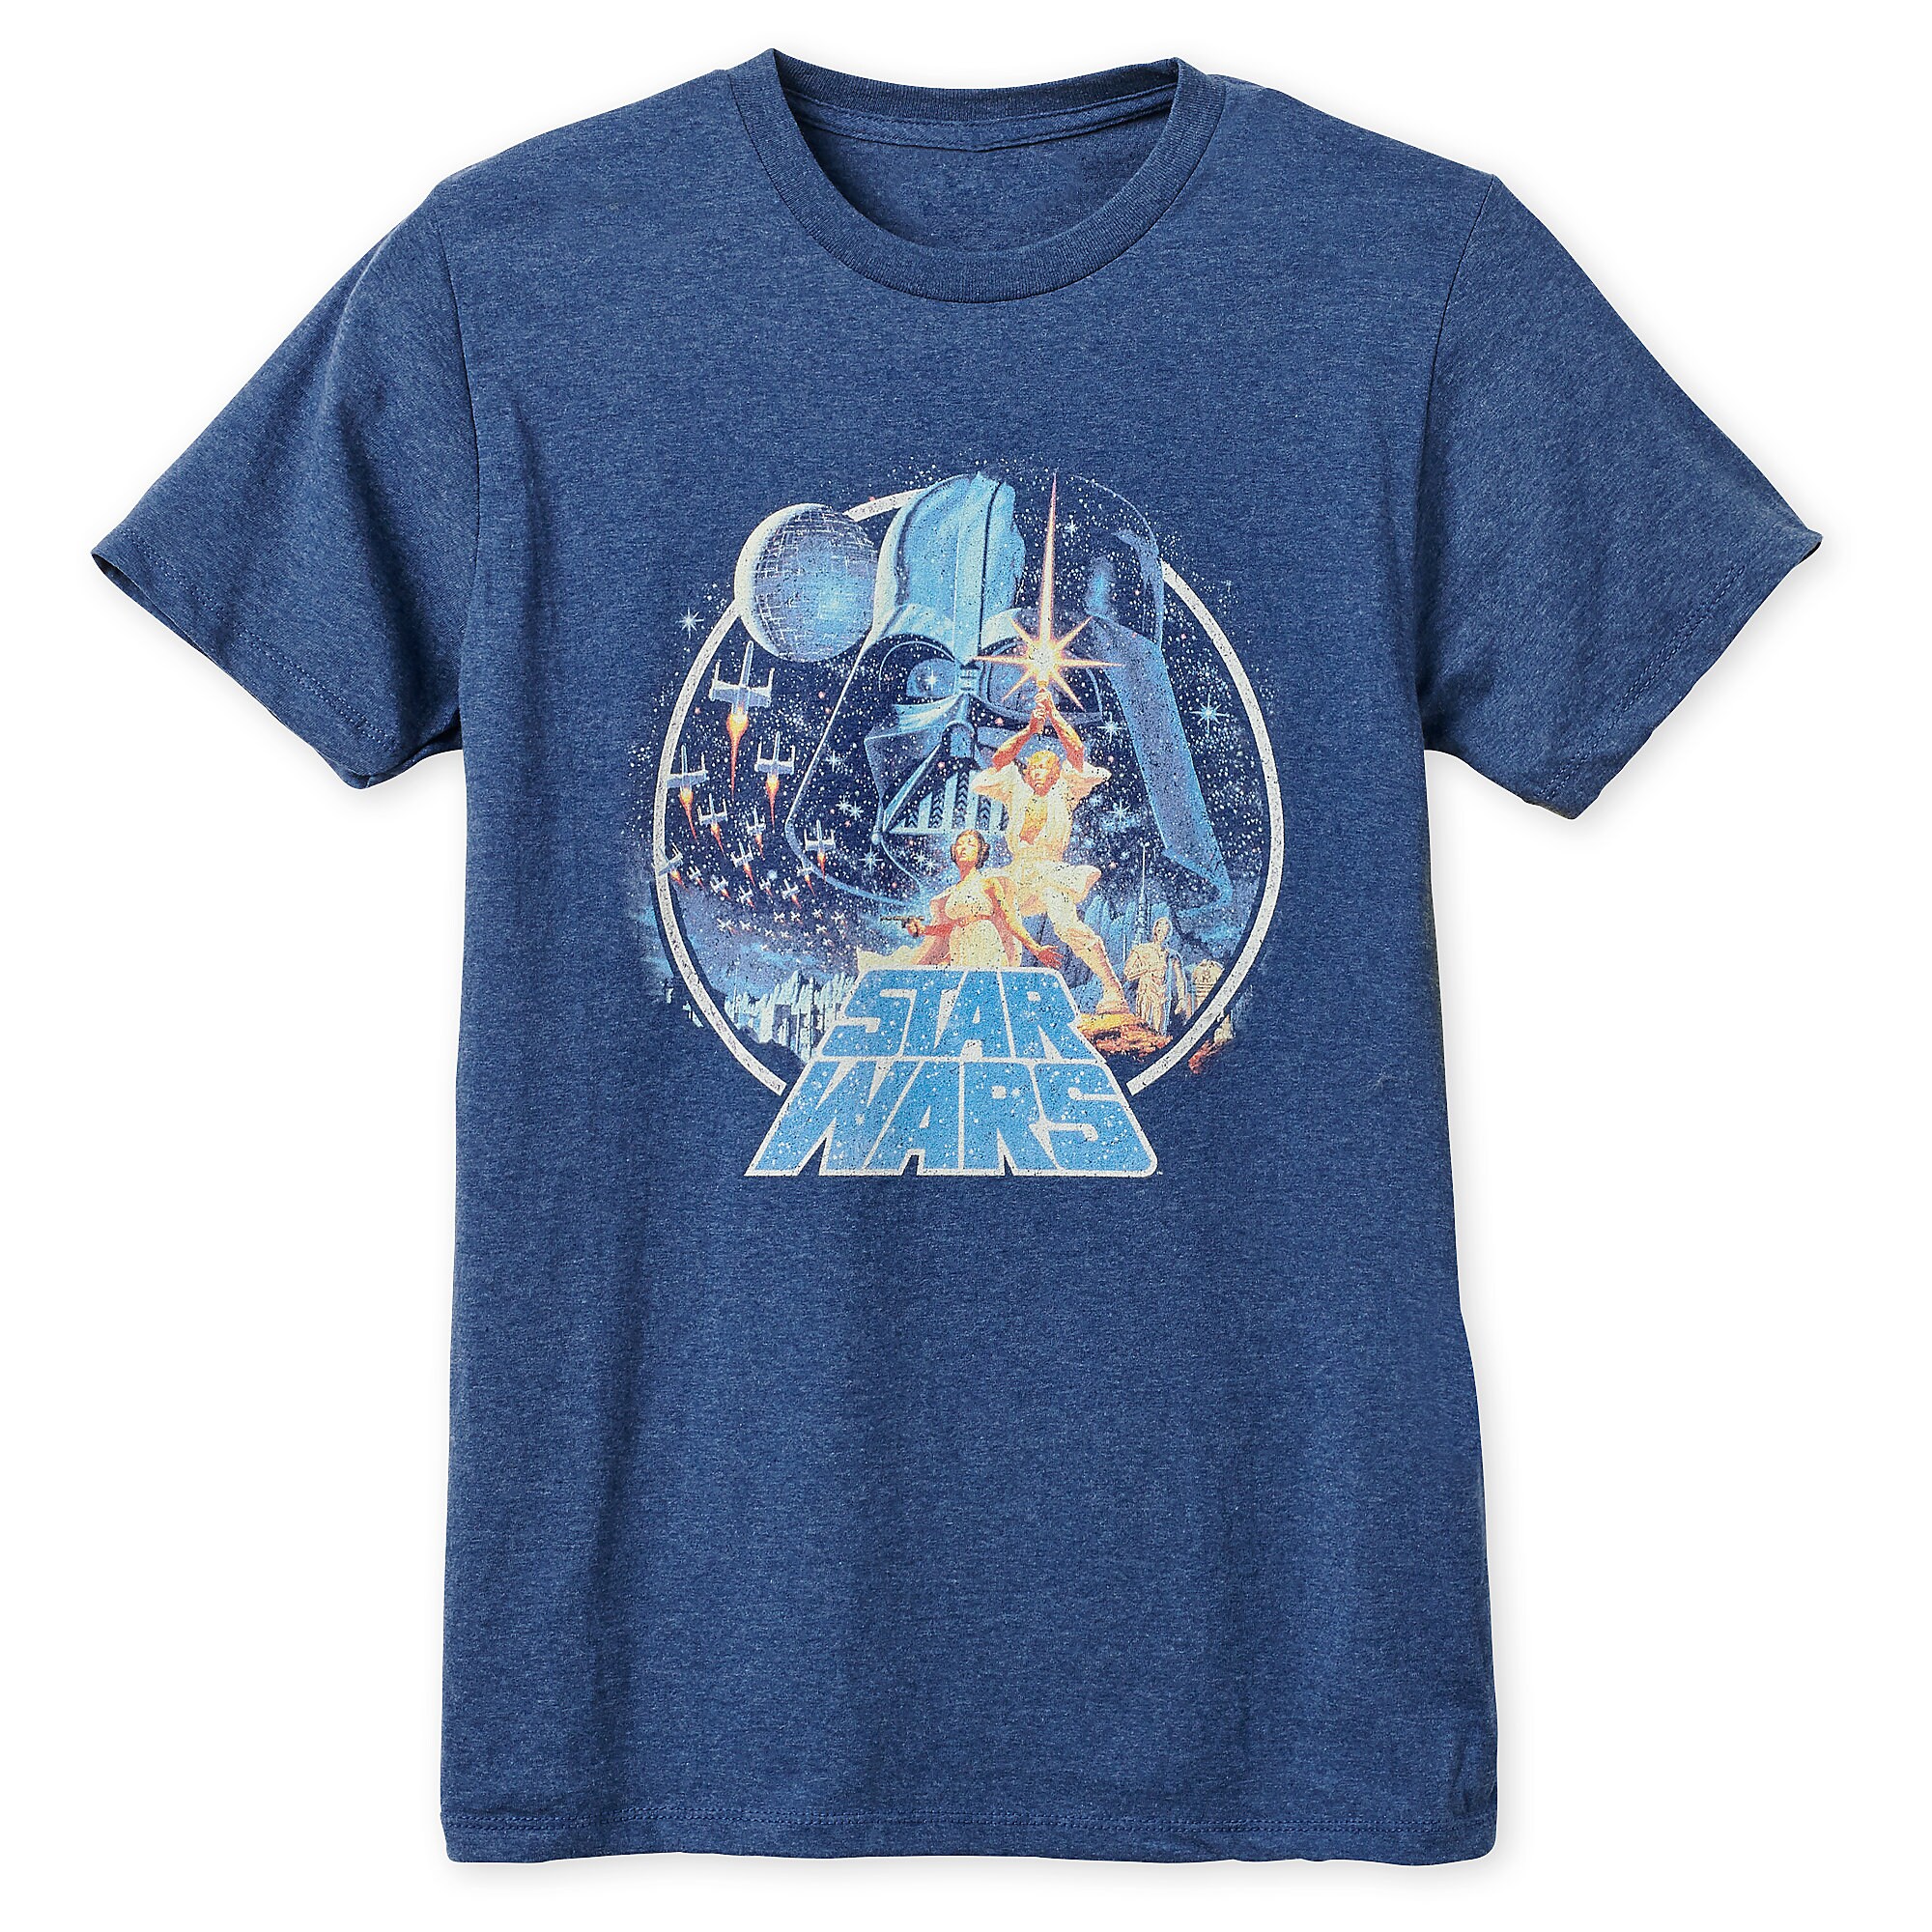 Star Wars Movie Poster T-Shirt for Adults